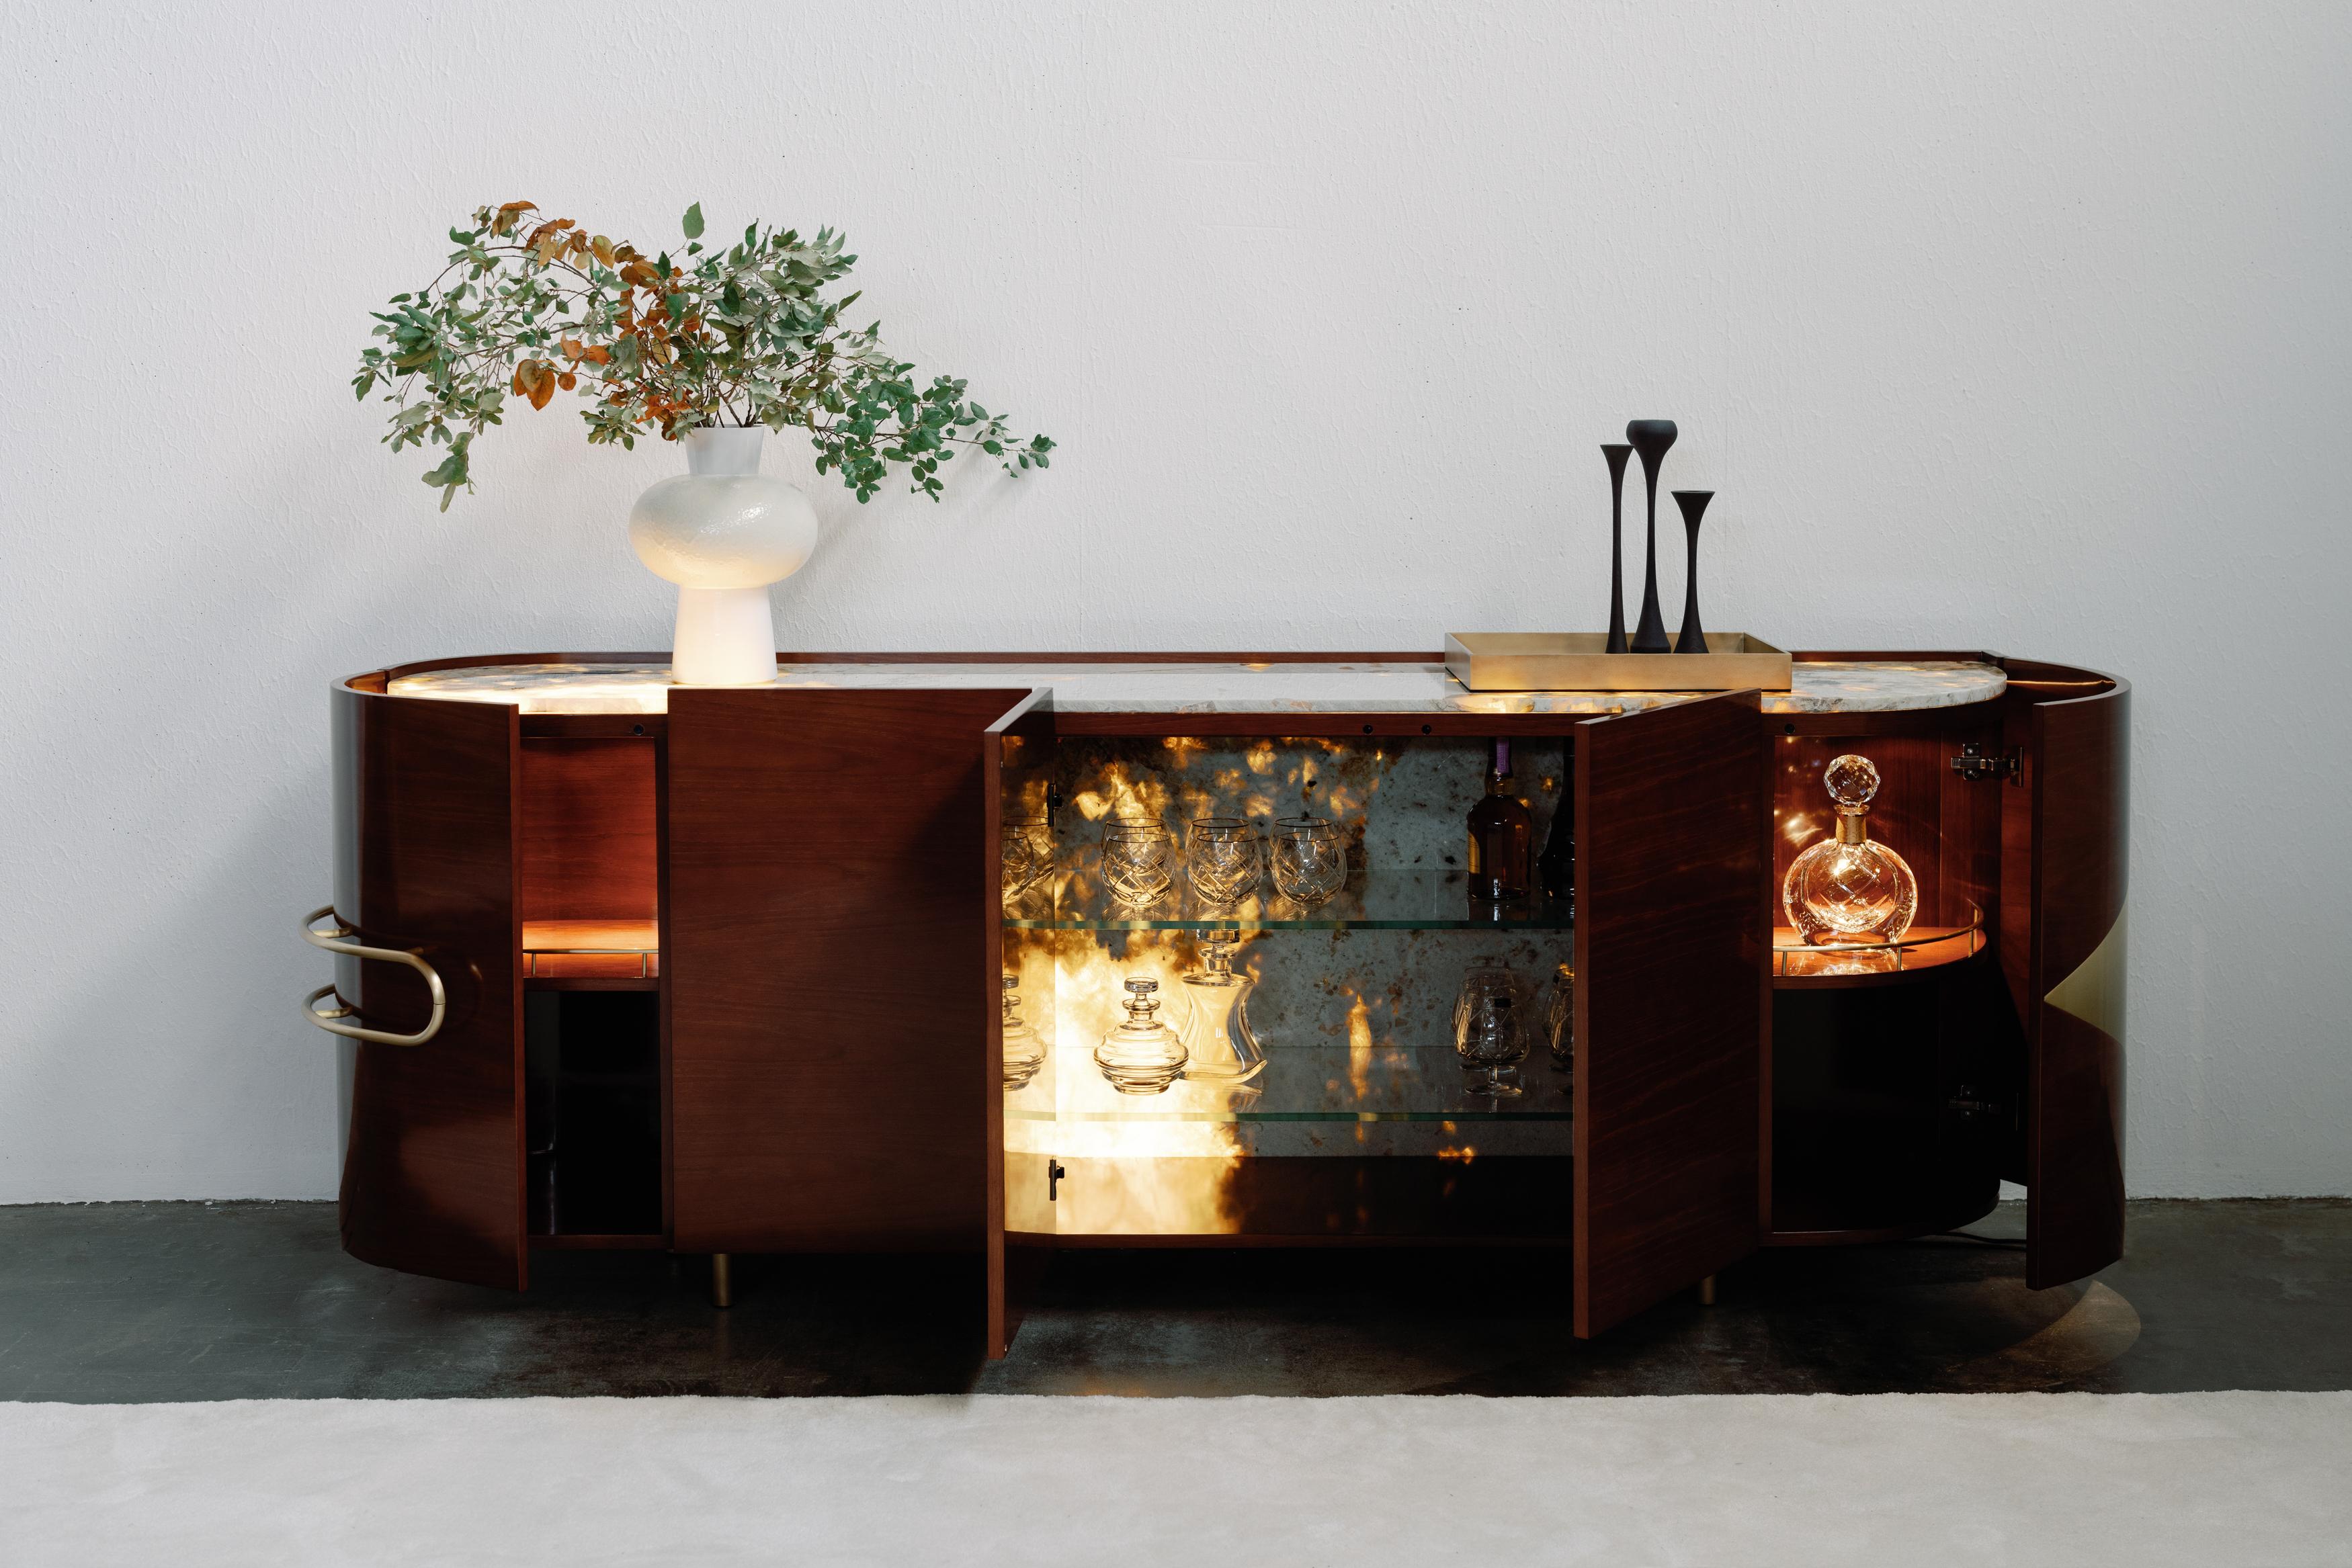 Olival Cocktail Cabinet, Contemporary Collection, Handcrafted in Portugal - Europe by Greenapple.

Designed by Rute Martins for the Contemporary Collection, the Olival modern cocktail cabinet is inspired by the sacred symbolism of the ancient Greek